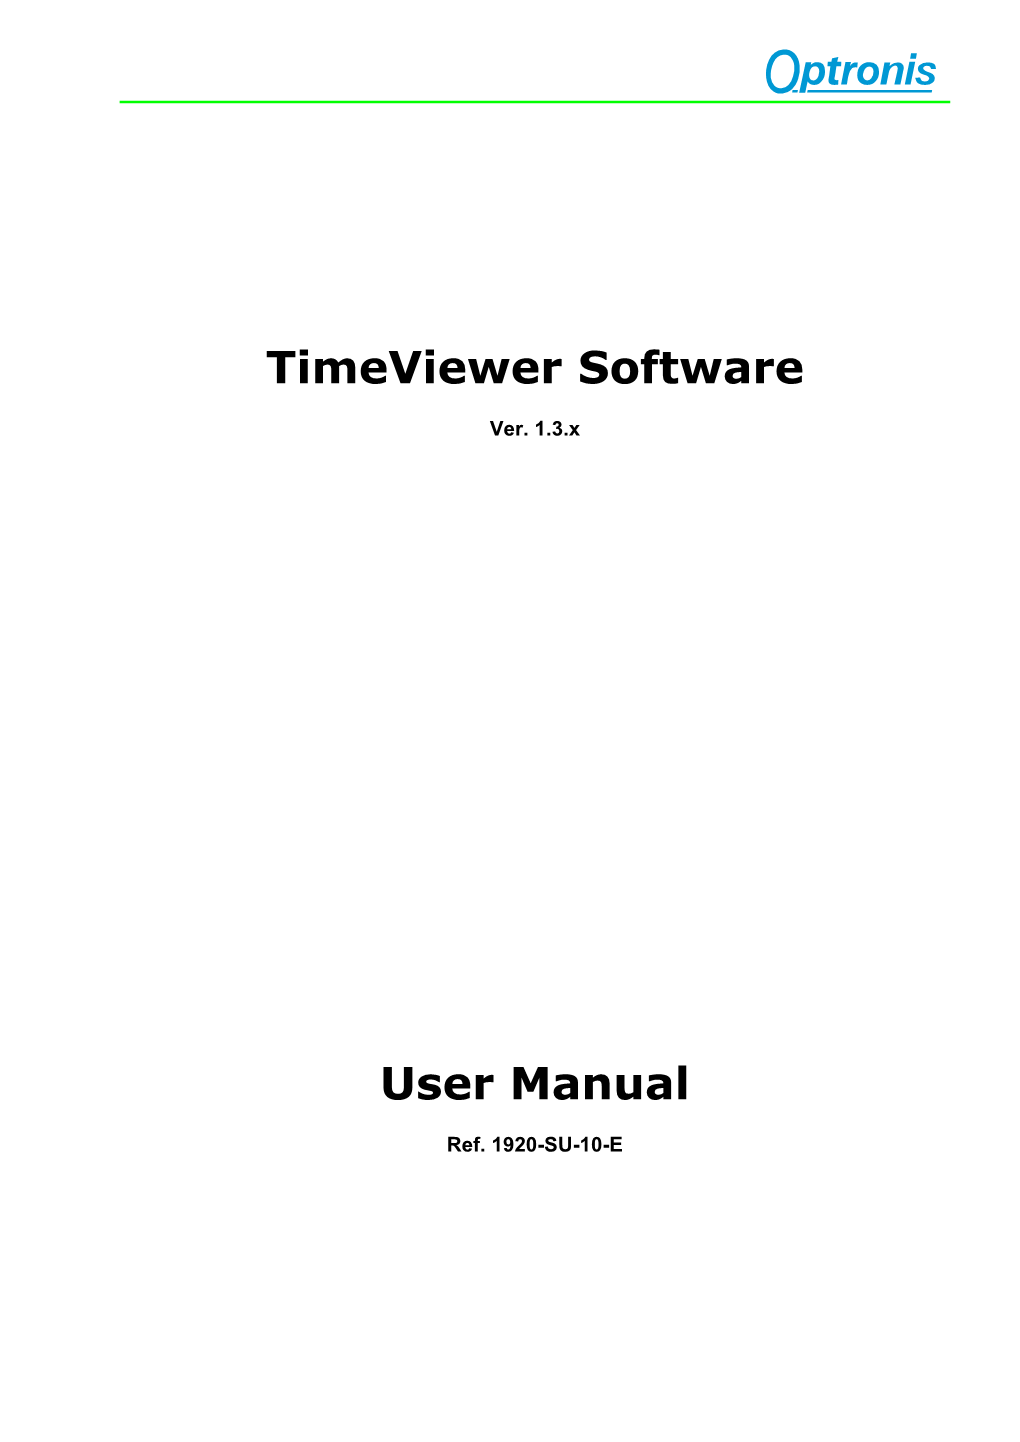 Timeviewer Software User Manual